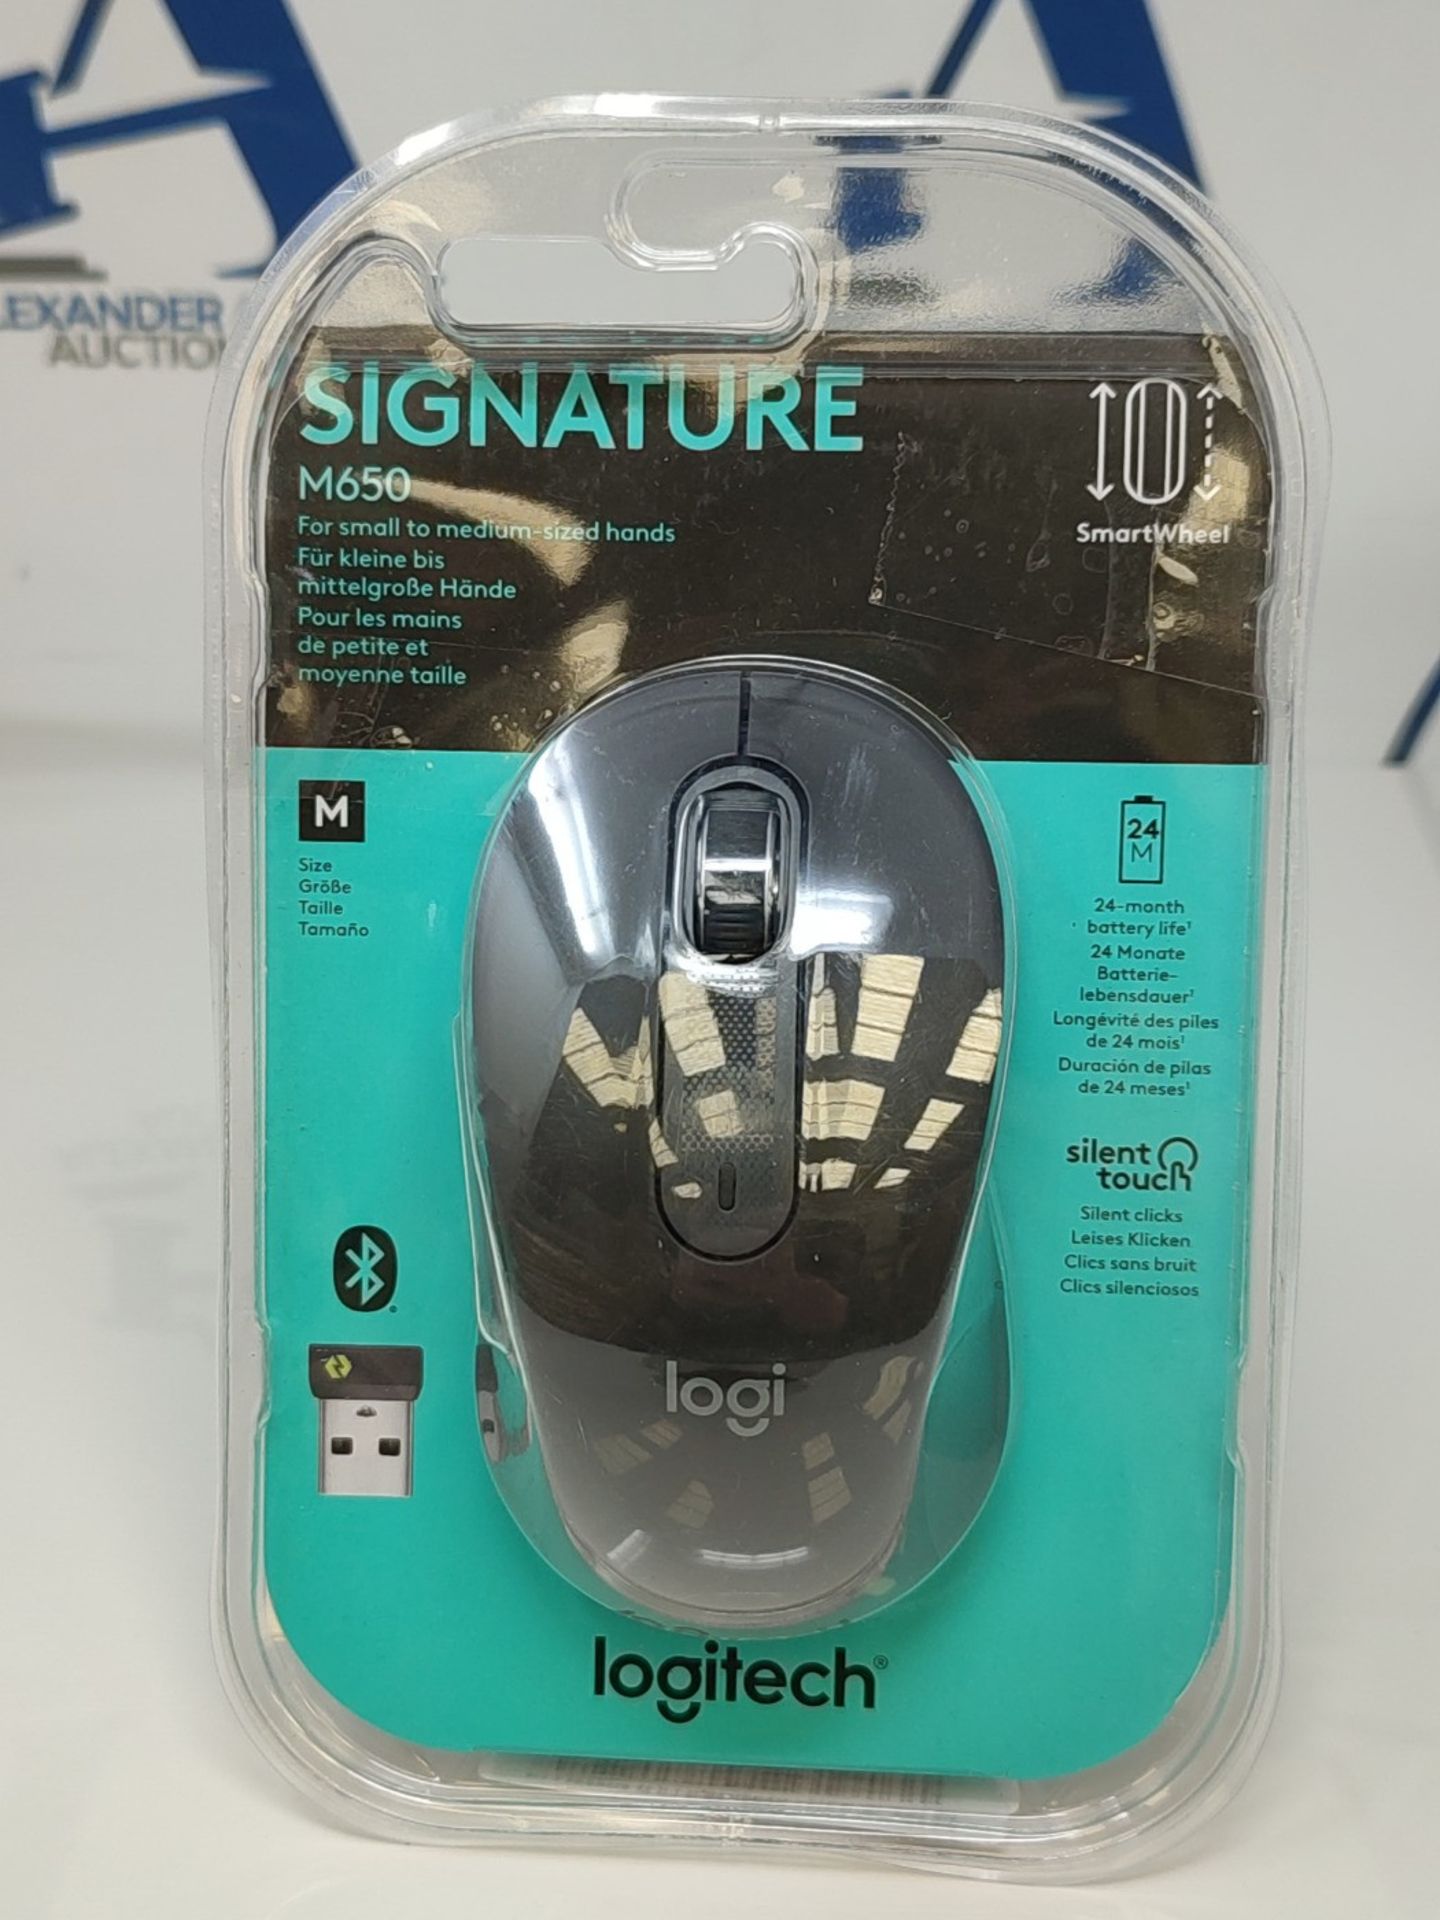 Logitech Signature M650 Wireless Mouse - for small to medium-sized hands, 2-year batte - Image 2 of 3